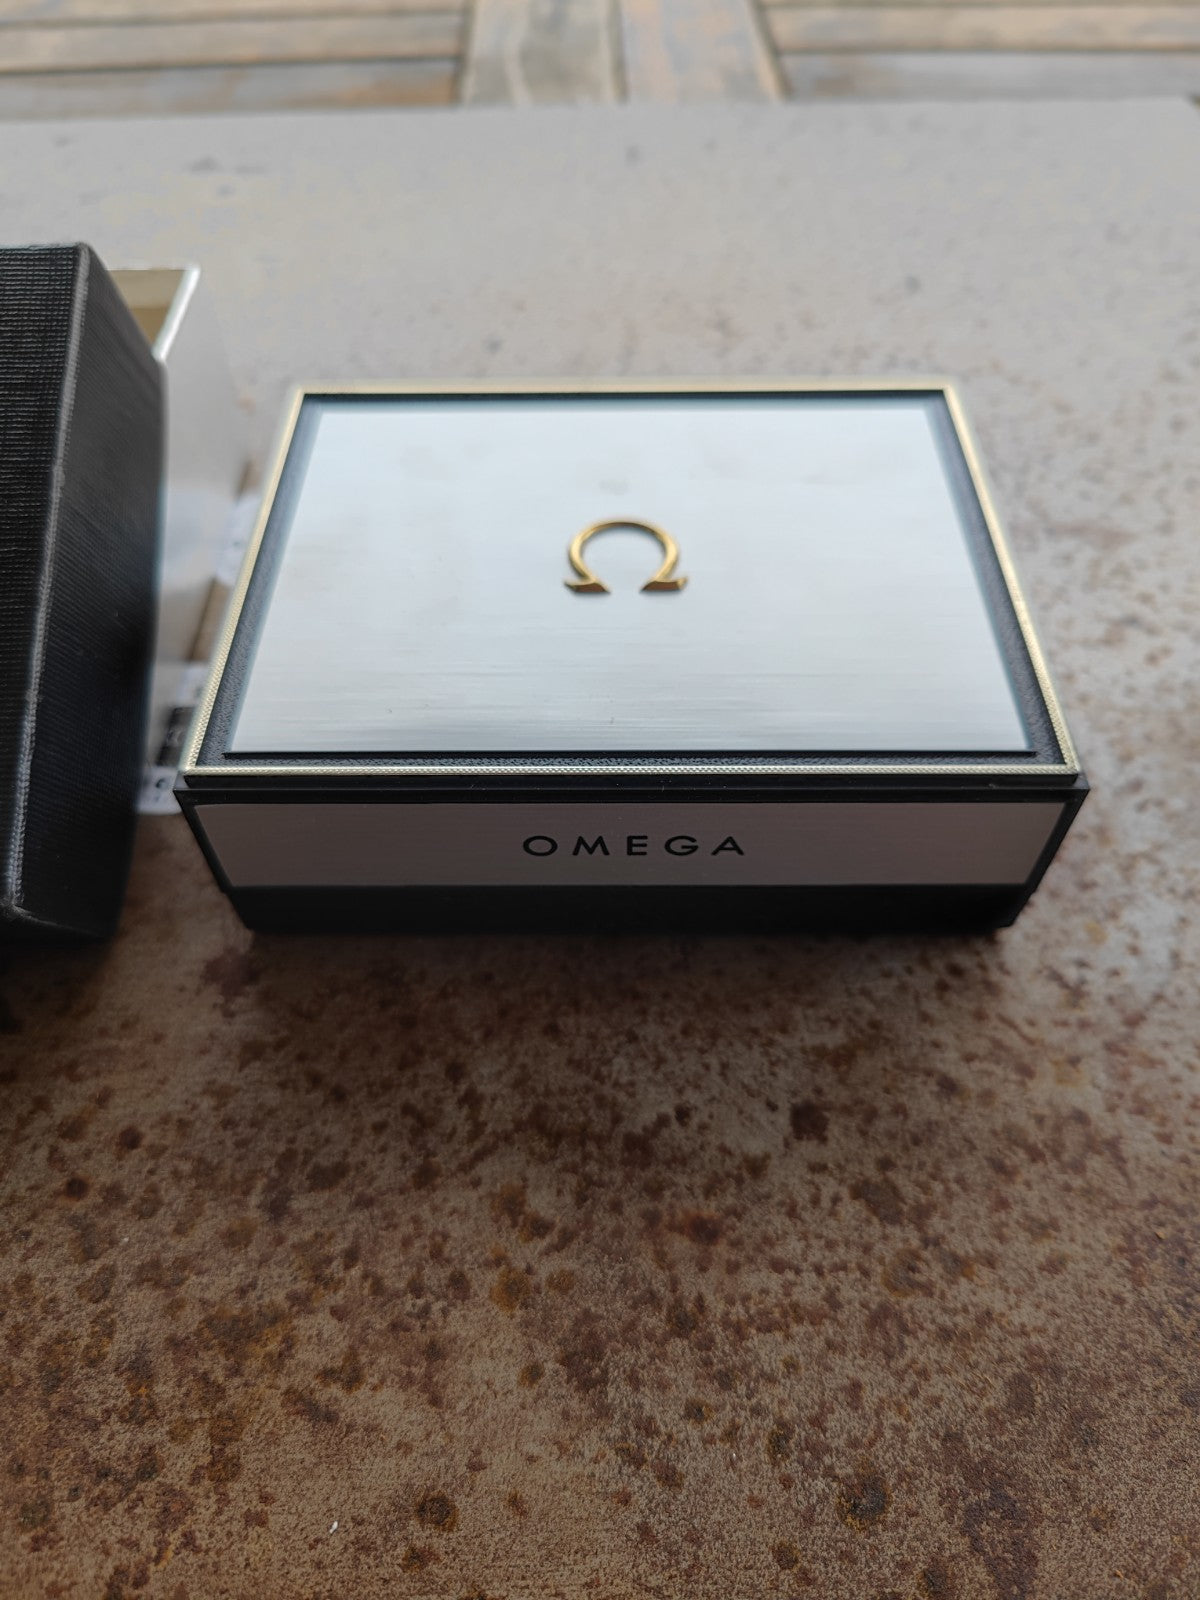 OMEGA box for 60s dress watches